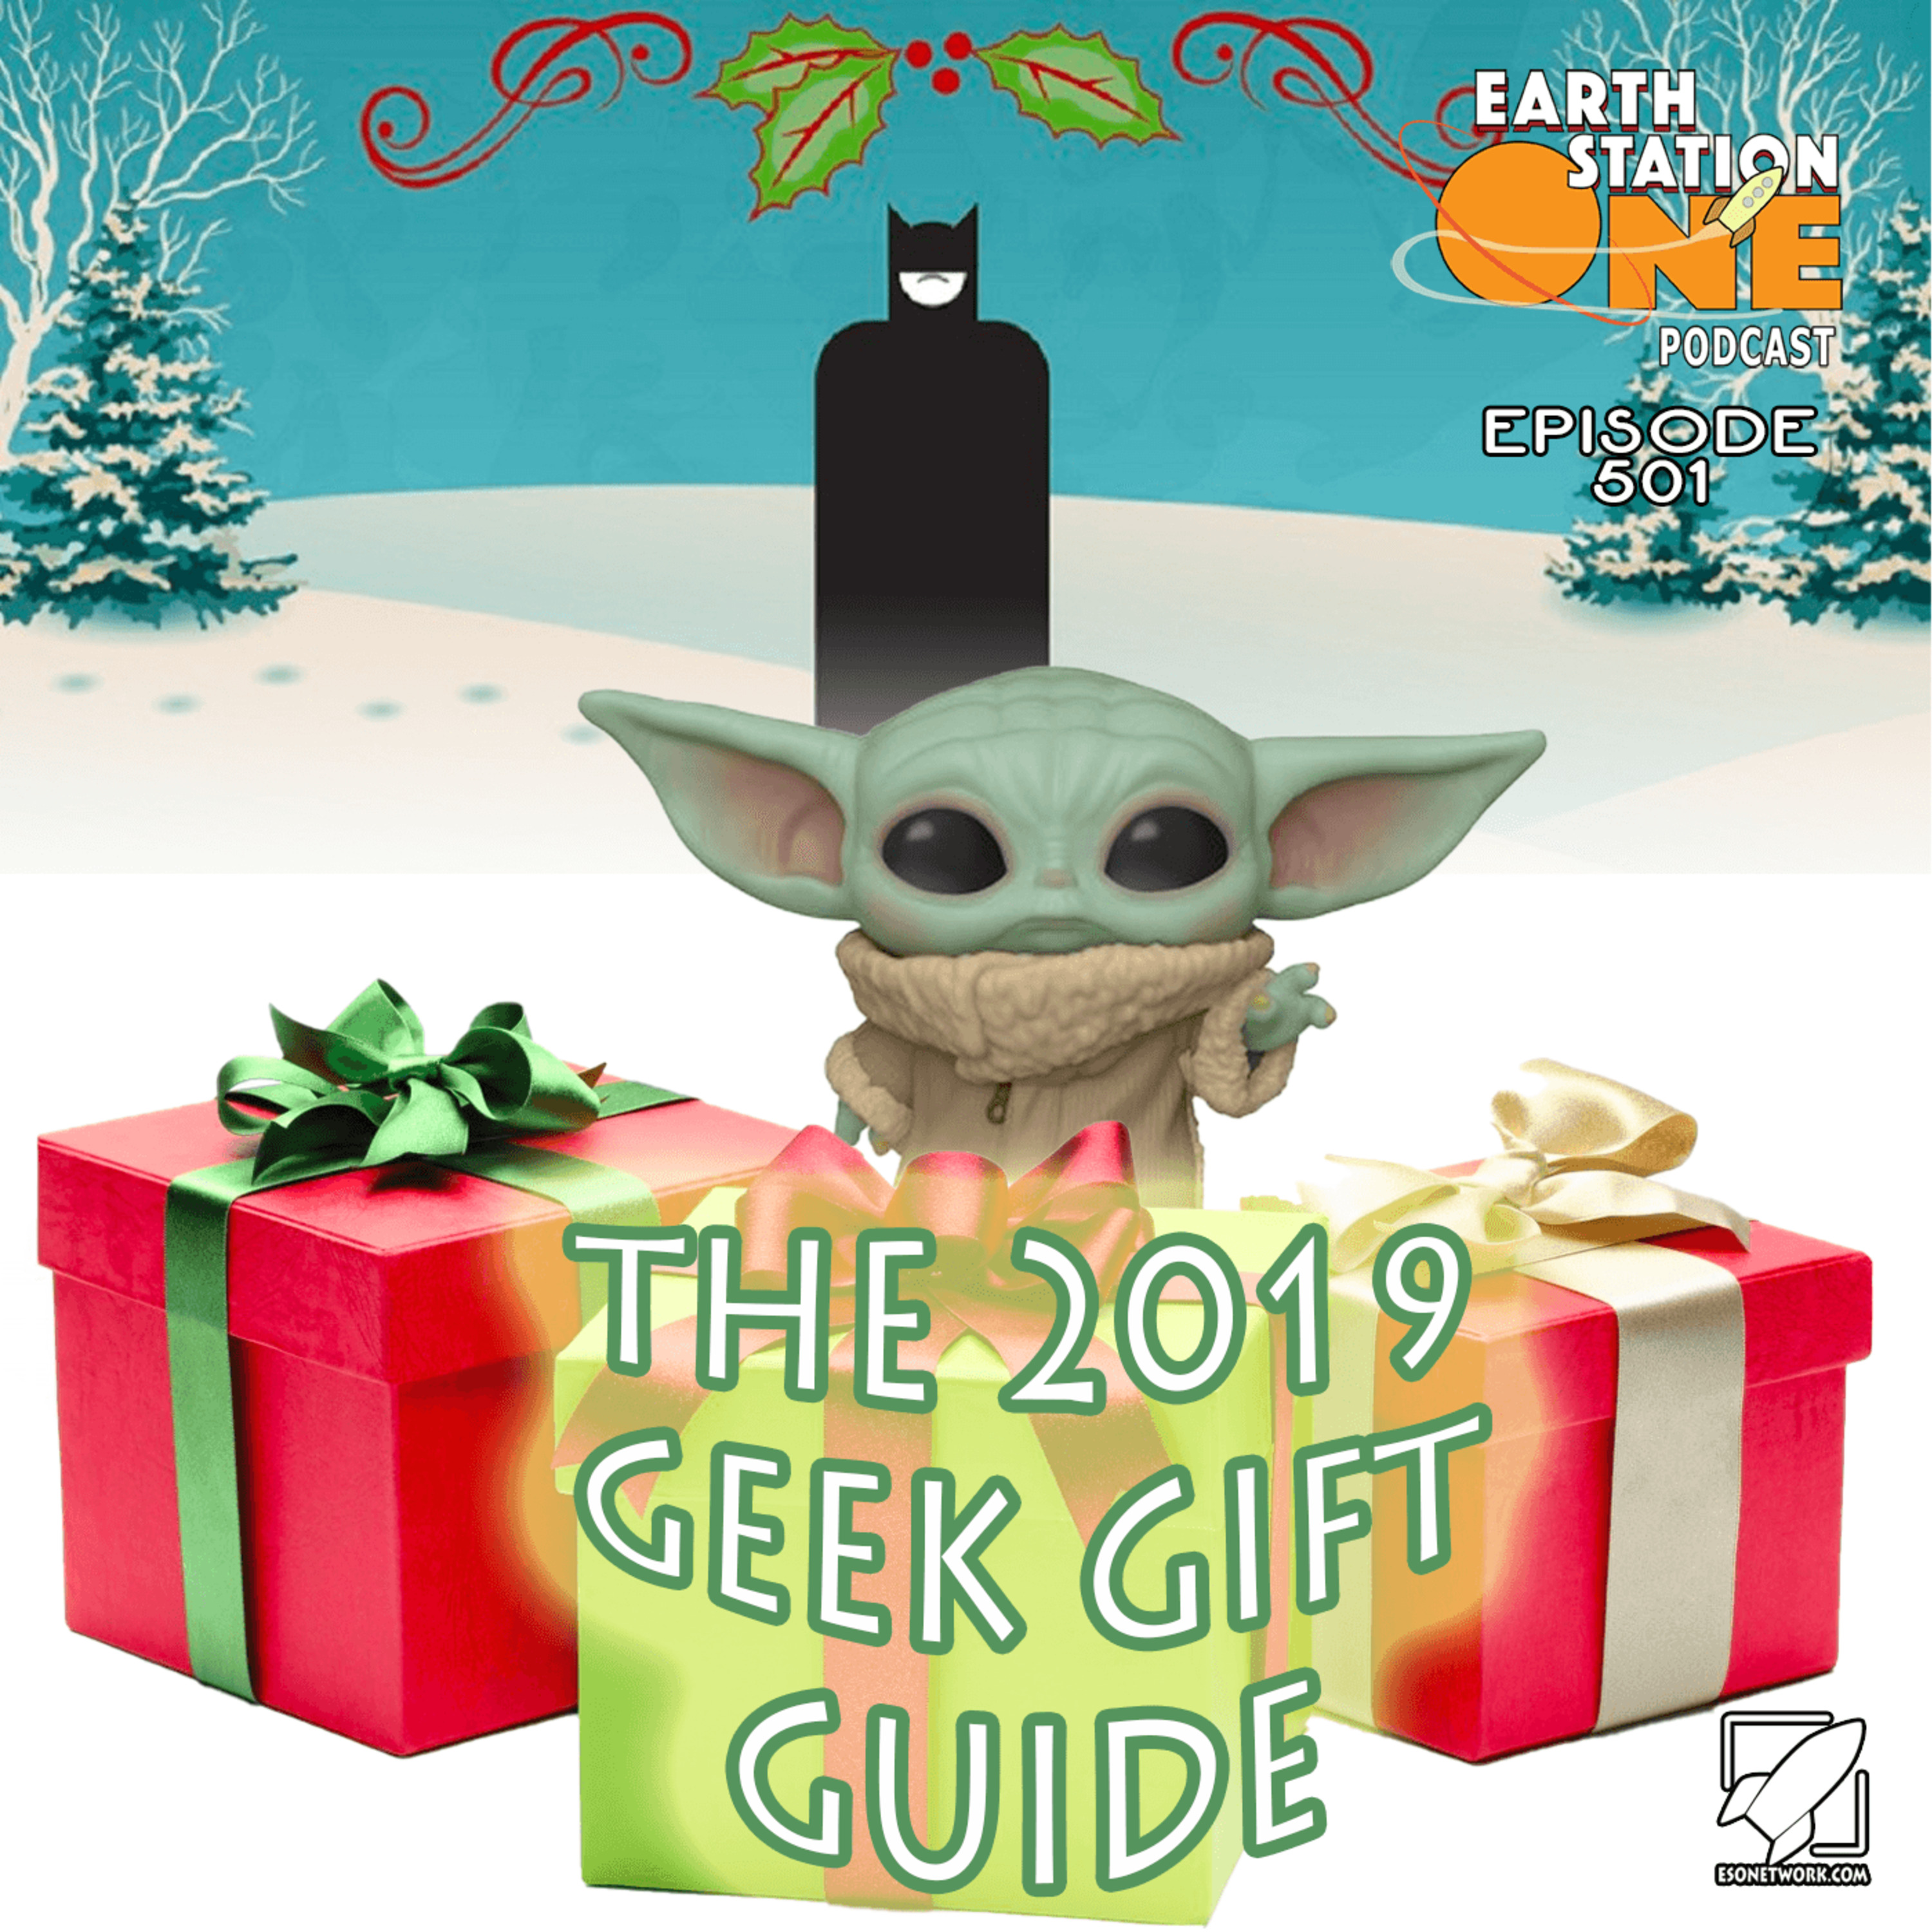 The Earth Station One Podcast – The 2019 Geek Gift Guide